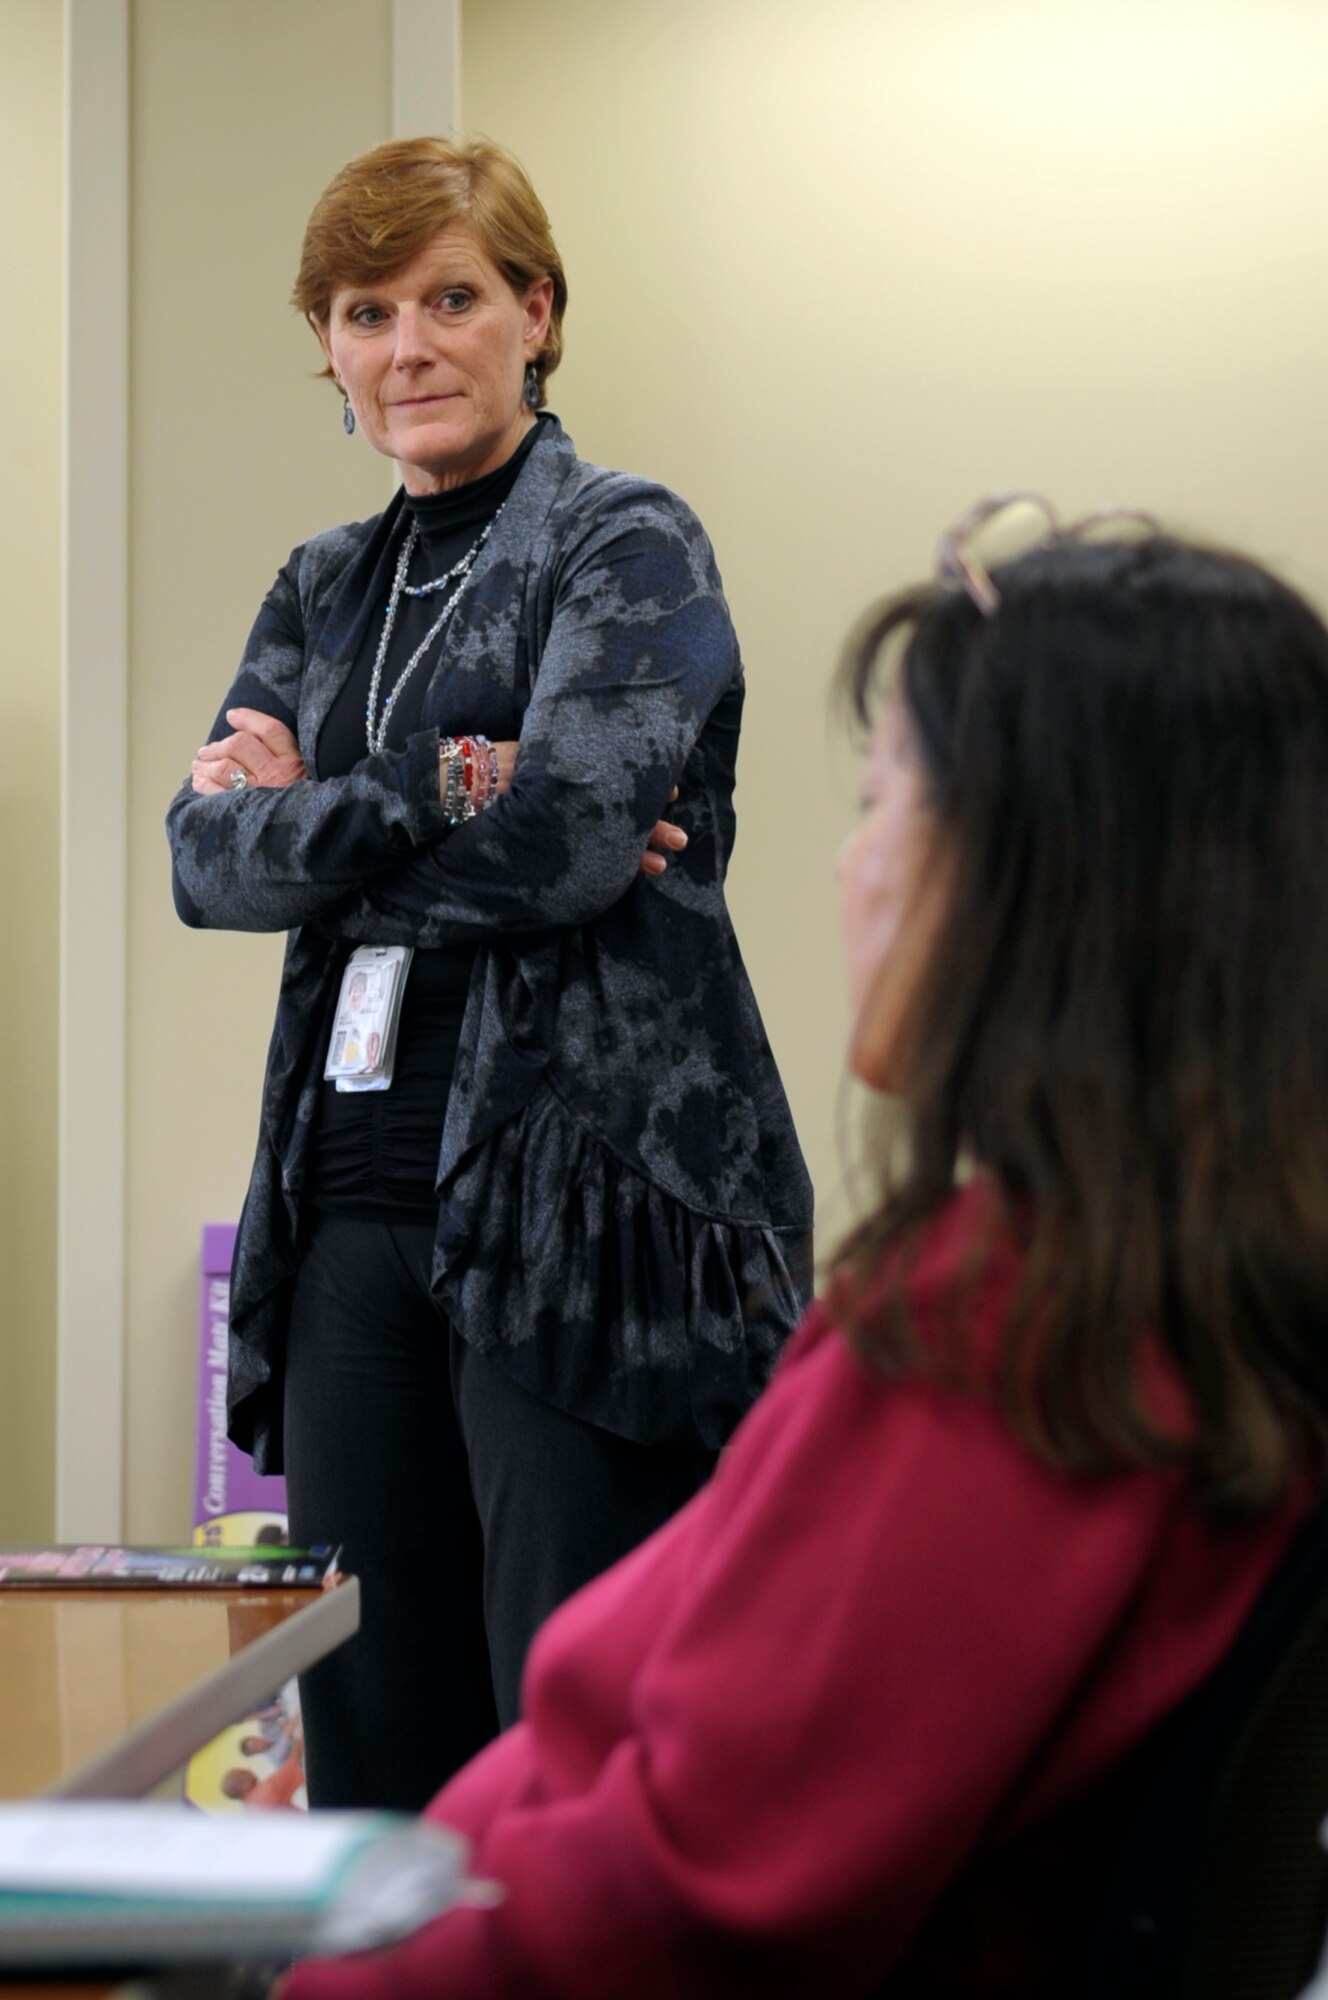 VANDENBERG AIR FORCE BASE, Calif. -- Melinda Reed, a certified diabetes educator at Vandenberg's Health and Wellness Center, listens as a patient describes what it is like to have diabetes during the Diabetes Conversation Maps class here Wednesday, Feb. 1, 2012. The class provides people with diabetes the opportunity to learn more about their condition with other diabetics during an interactive forum that engages small groups of people in an open discussion about diabetes. (U.S. Air Force photo/Jerry E. Clemens Jr.)